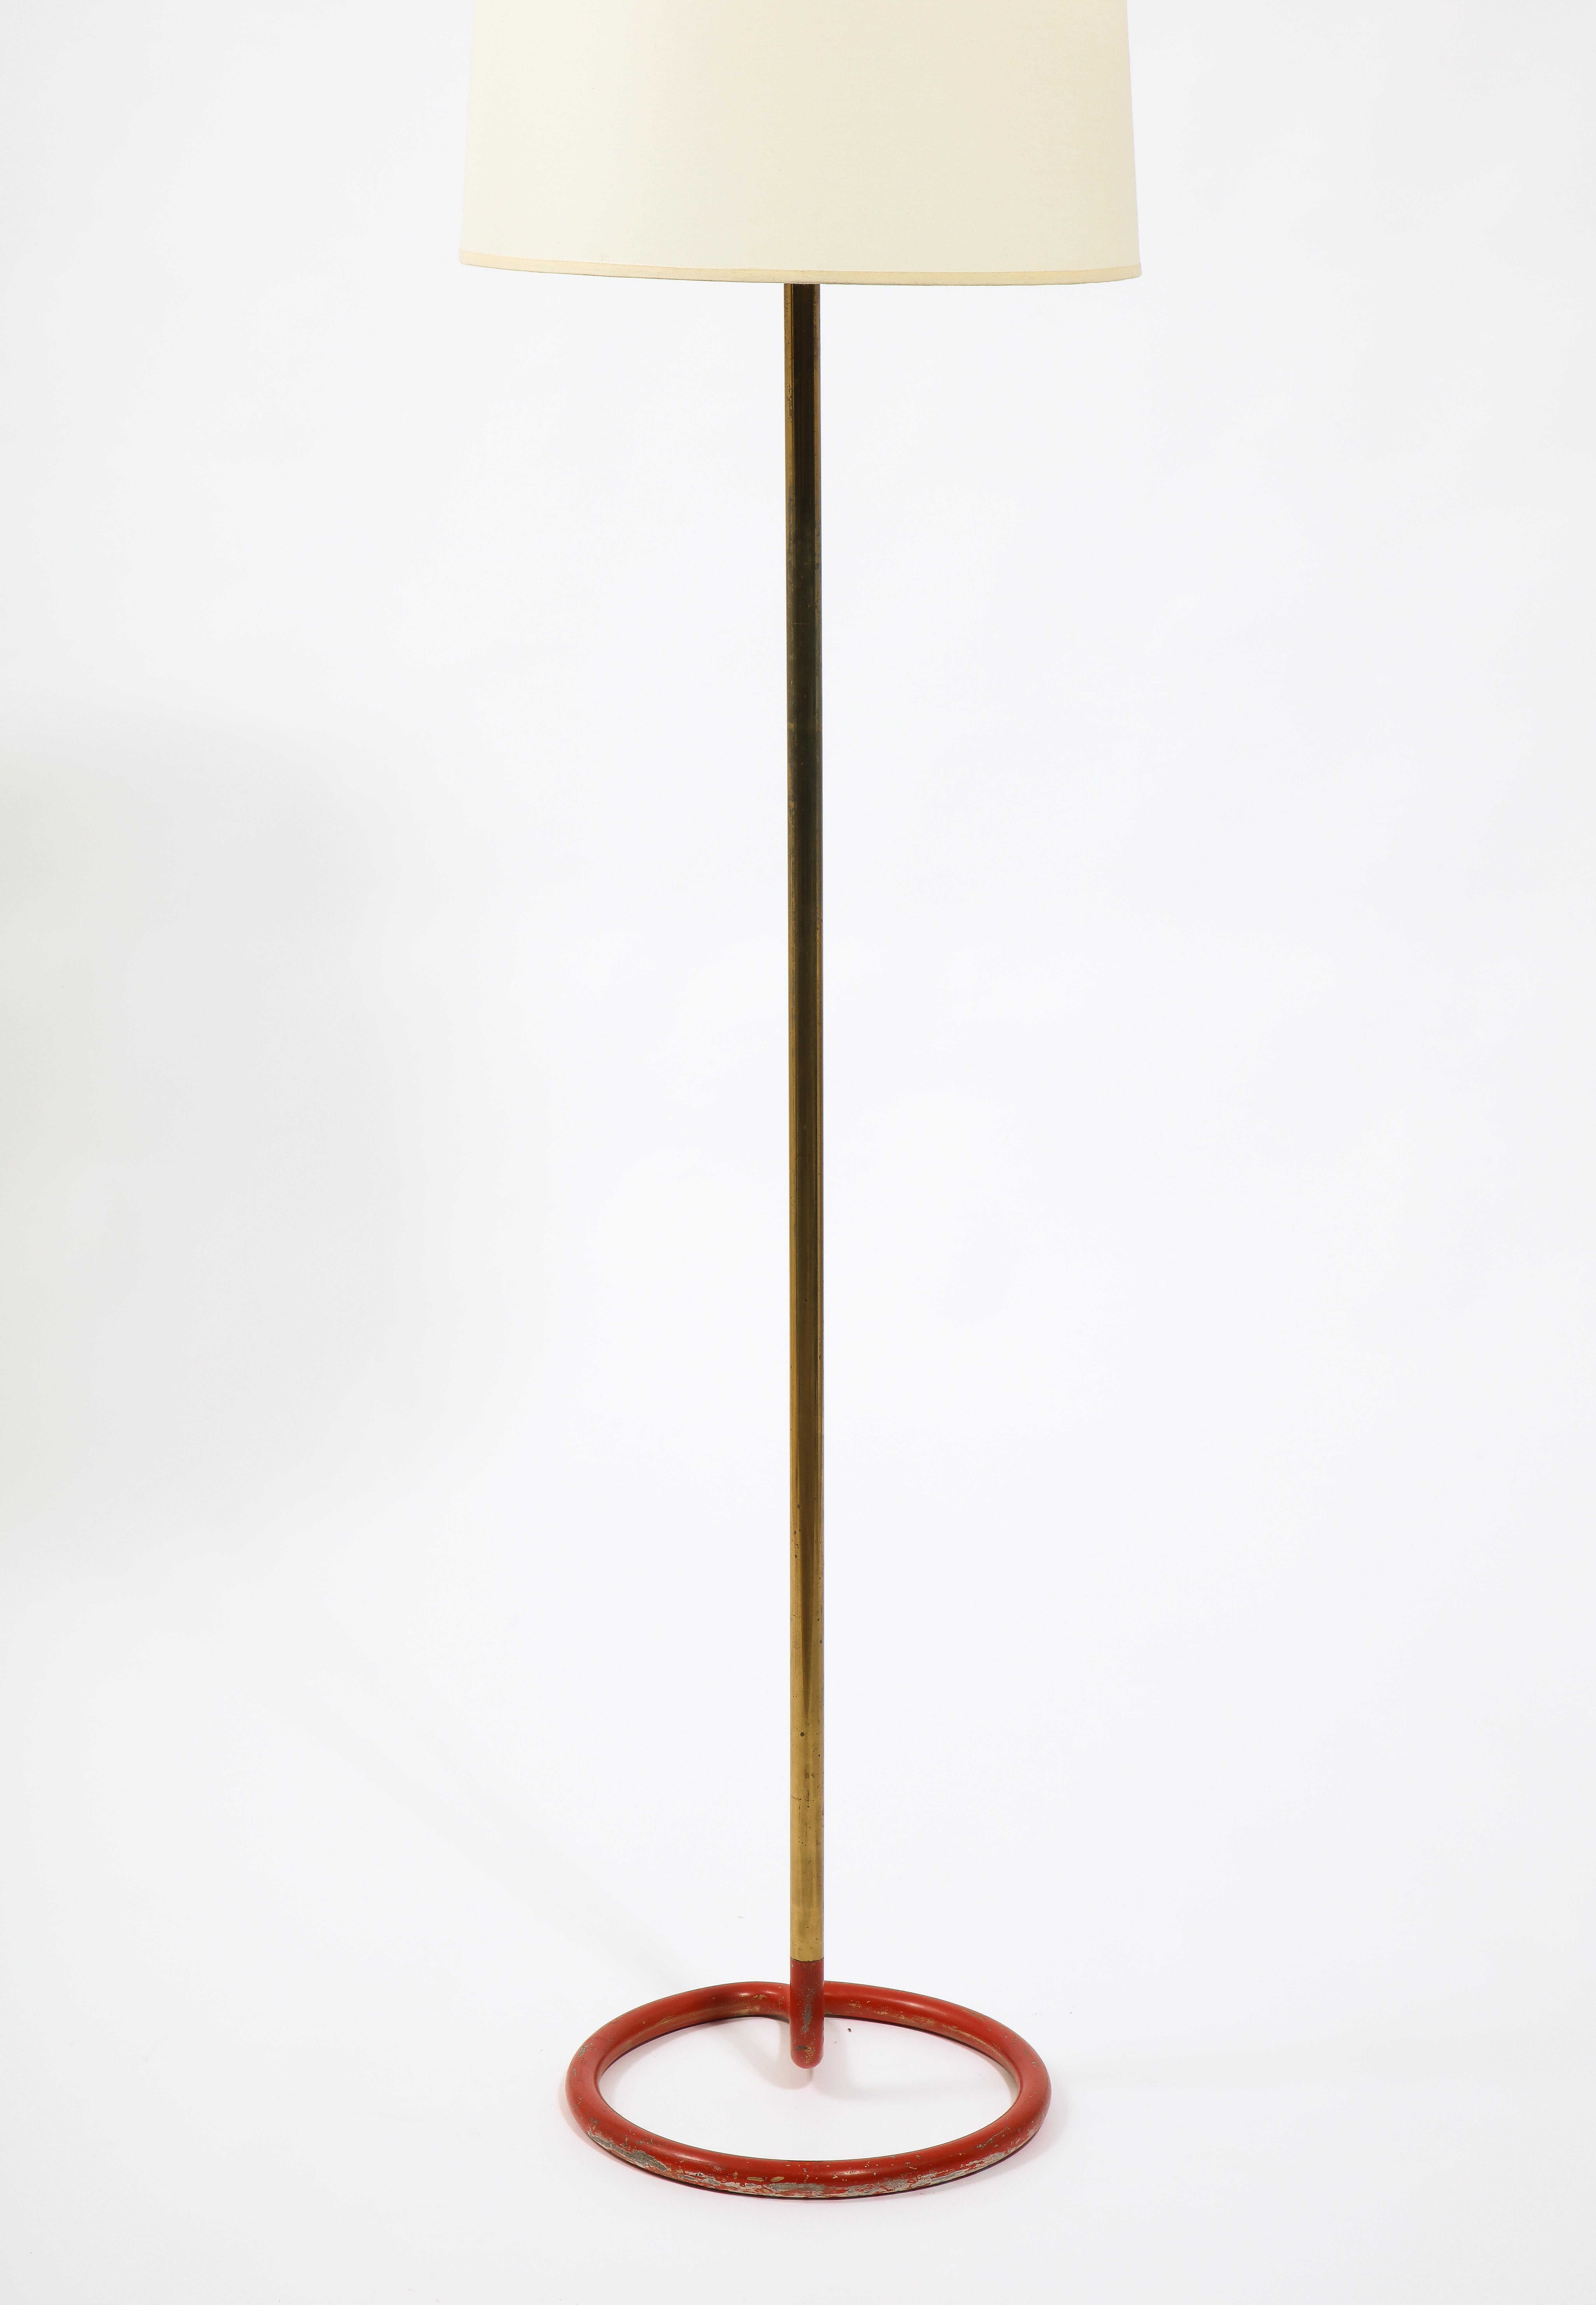 20th Century Red Wrougt Iron and Brass Floor Lamp by Stablet, France 1950's